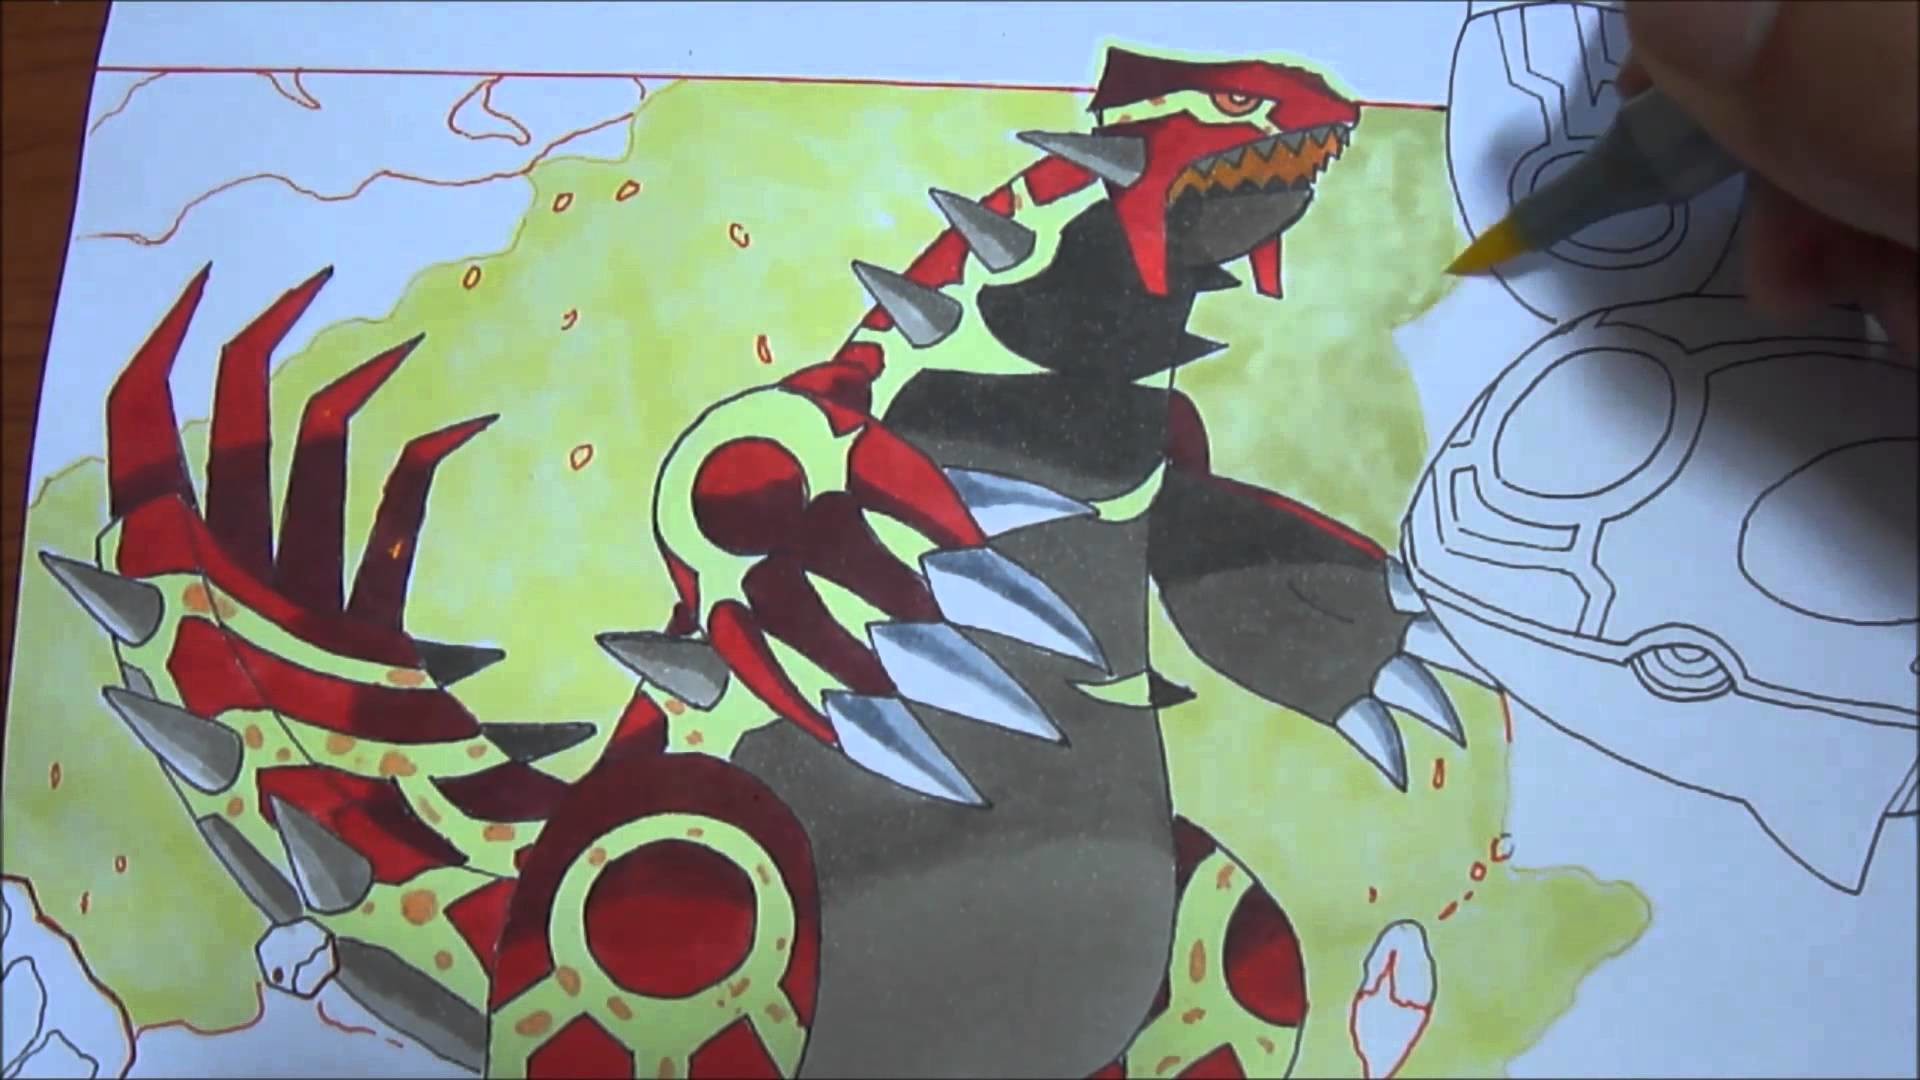 1920x1080 Copic speed draw Primal Groudon and Primal Kyogre ã²ã³ã·ã°ã©ã¼ãã³ and ã²ã³ã·ã«ã¤ãªã¼ã¬ -  YouTube